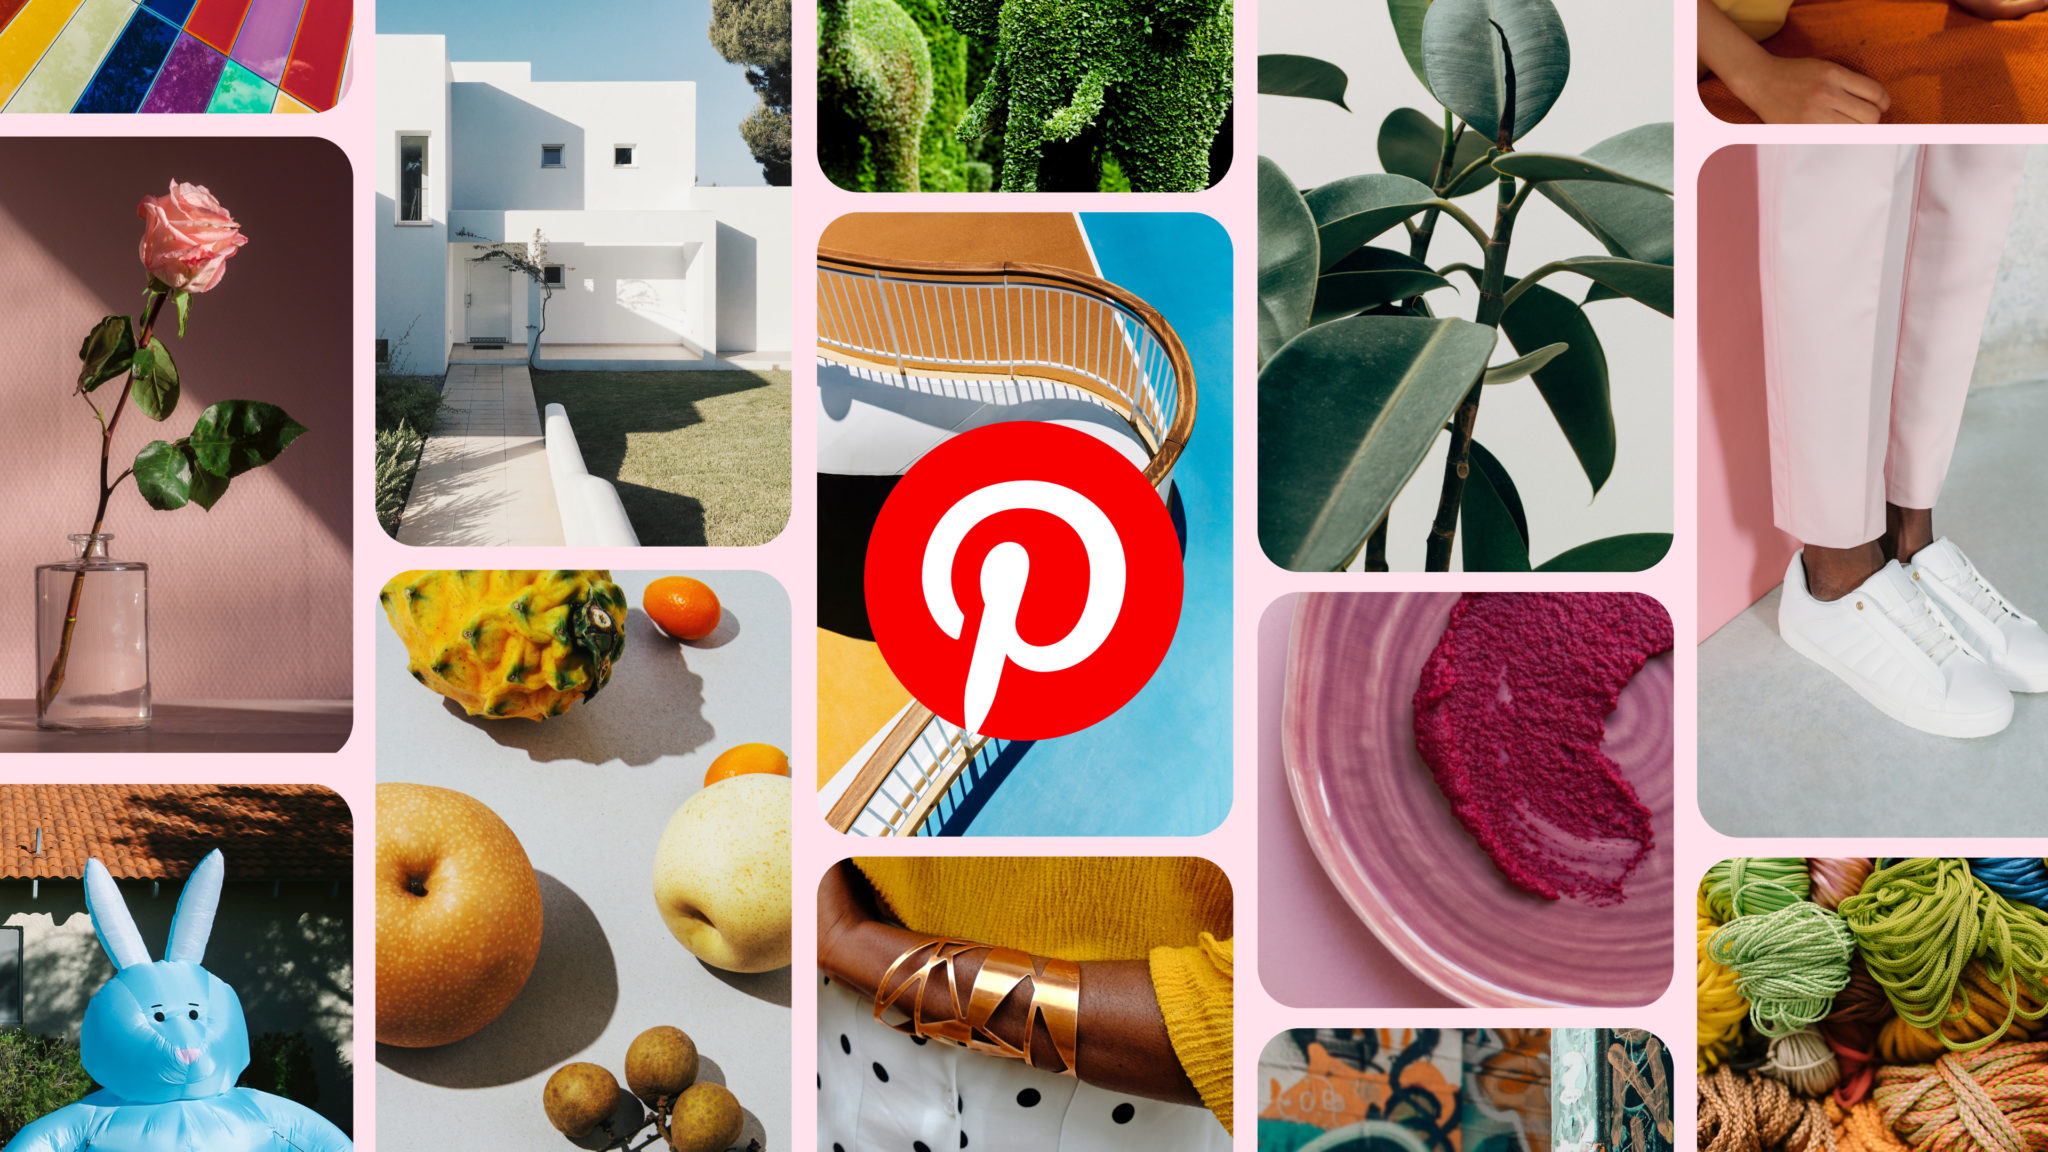 Pinterest Boosts Home Feed Engagement 16% With Switch to GPU Acceleration of Recommenders